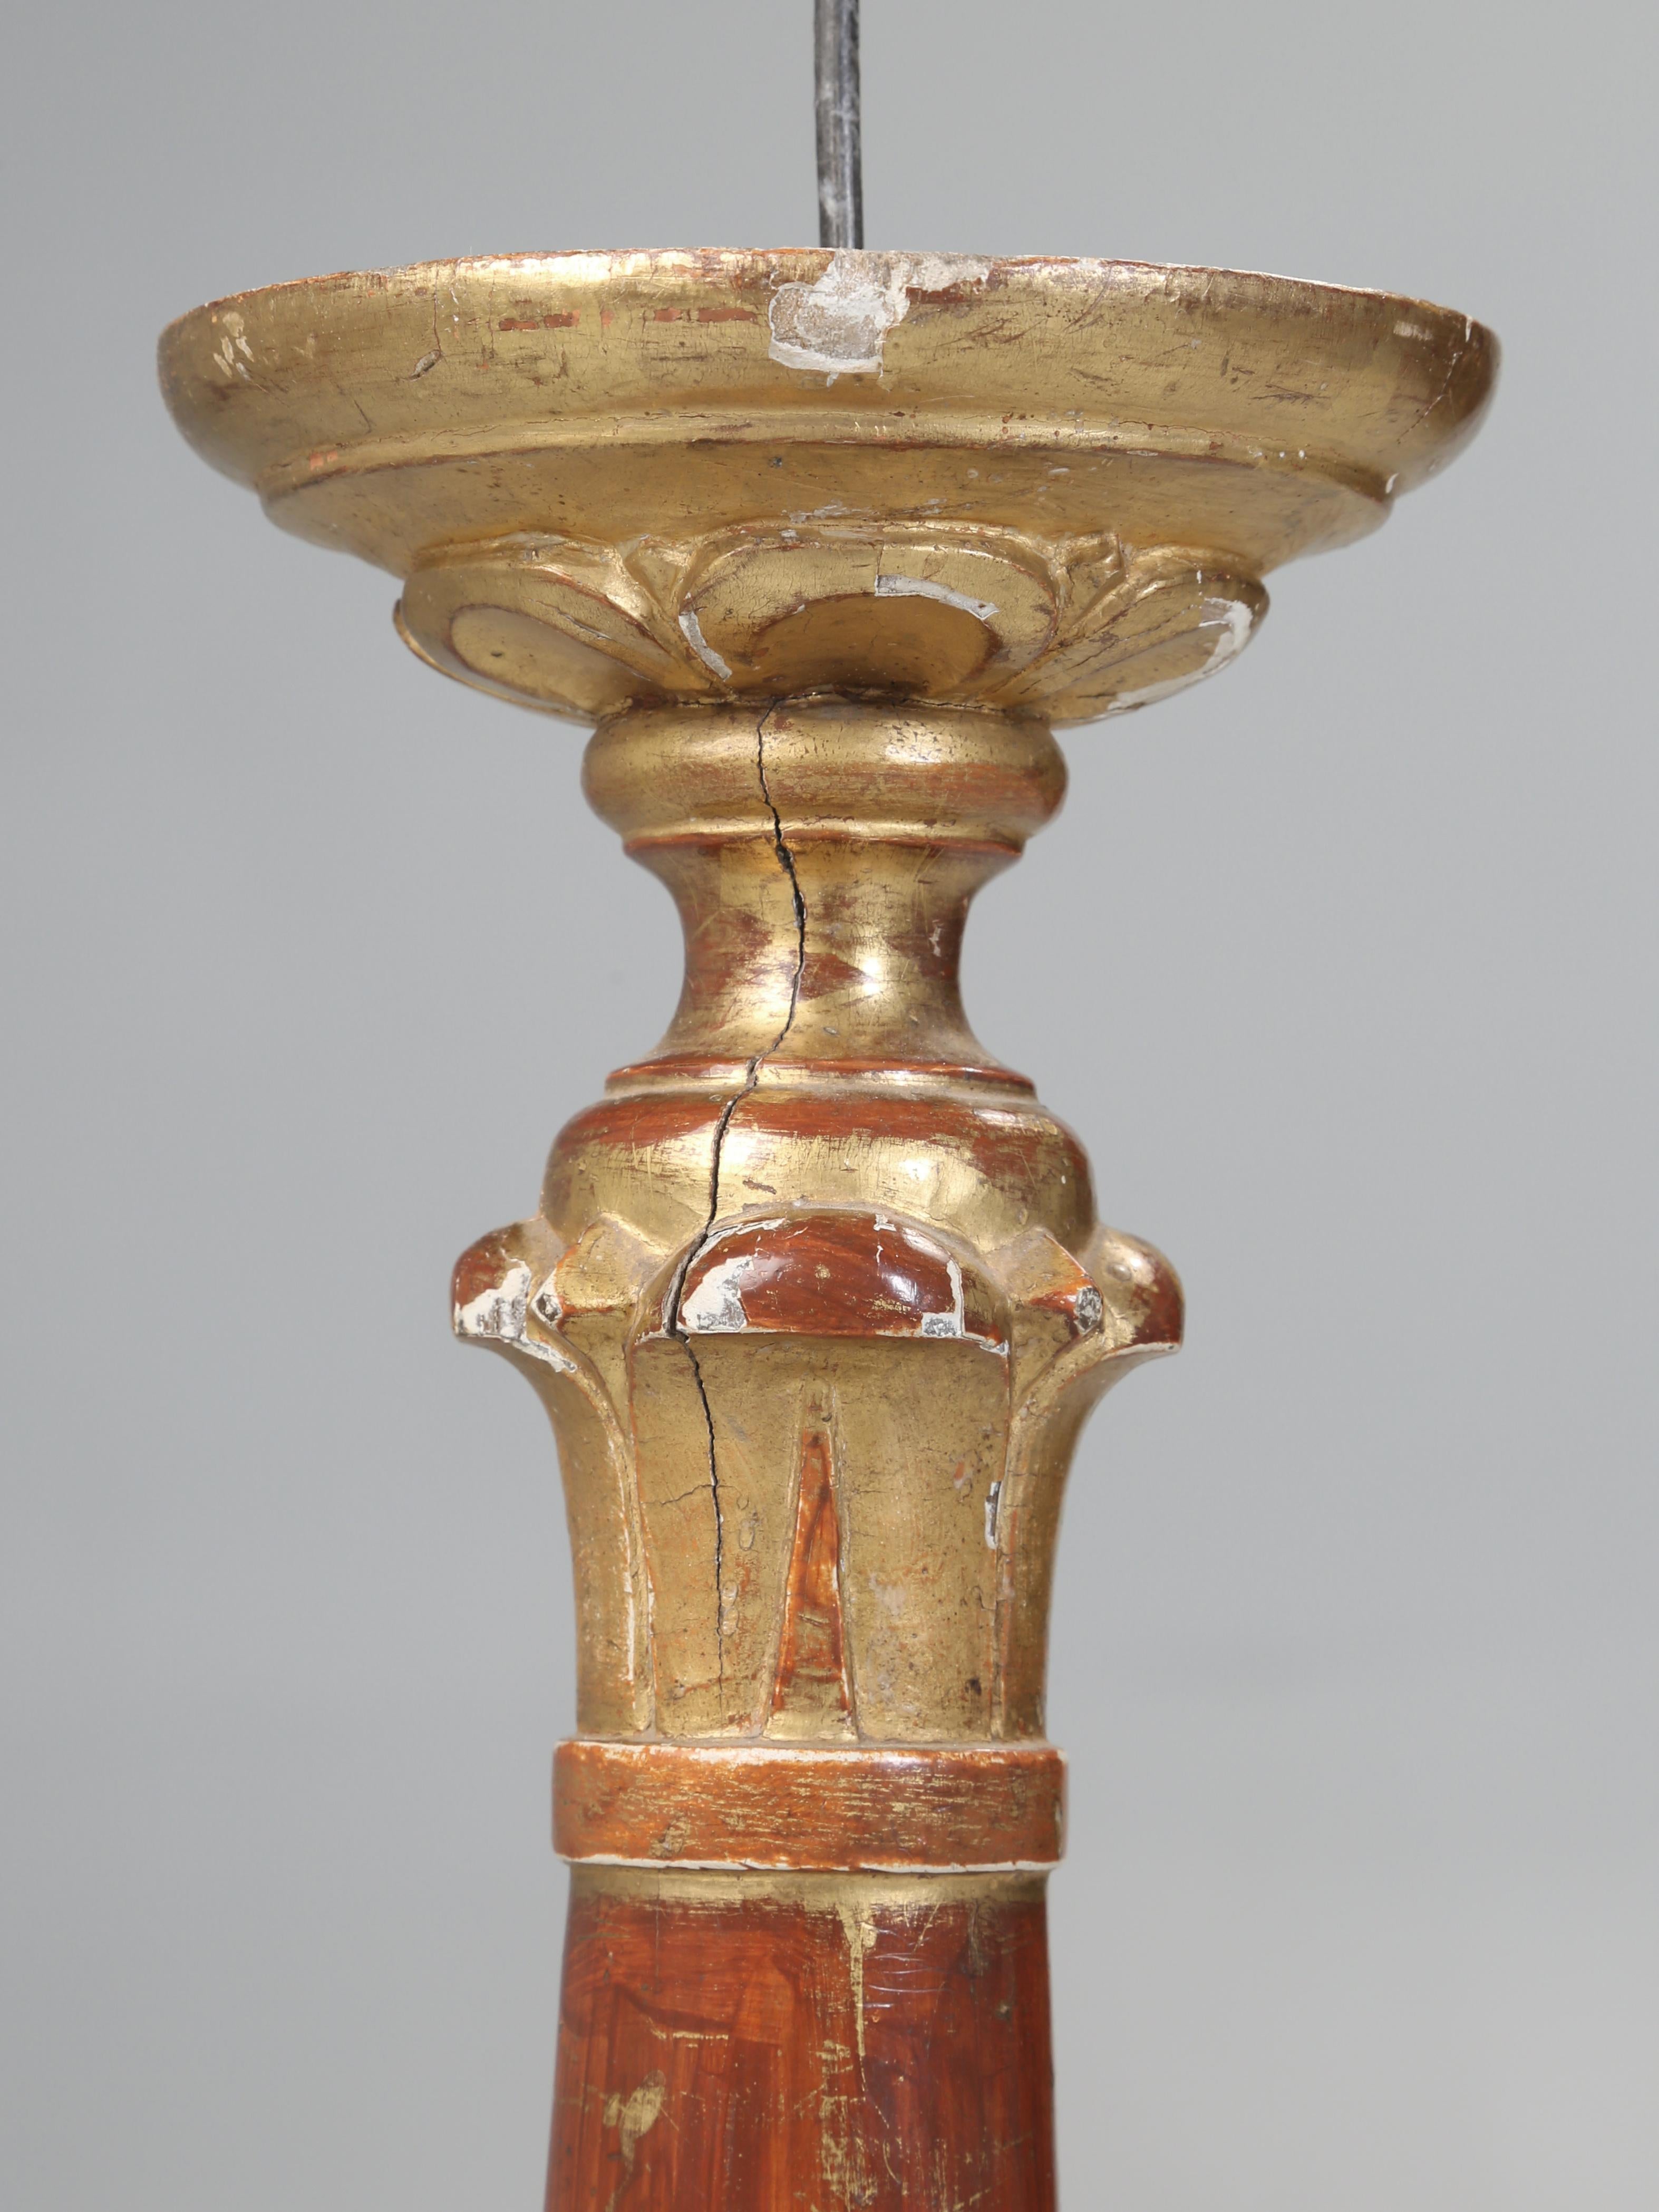 Hand-Crafted Italian Gilded Altar Candlestick Completely Original and Unrestored c1780-1820 For Sale